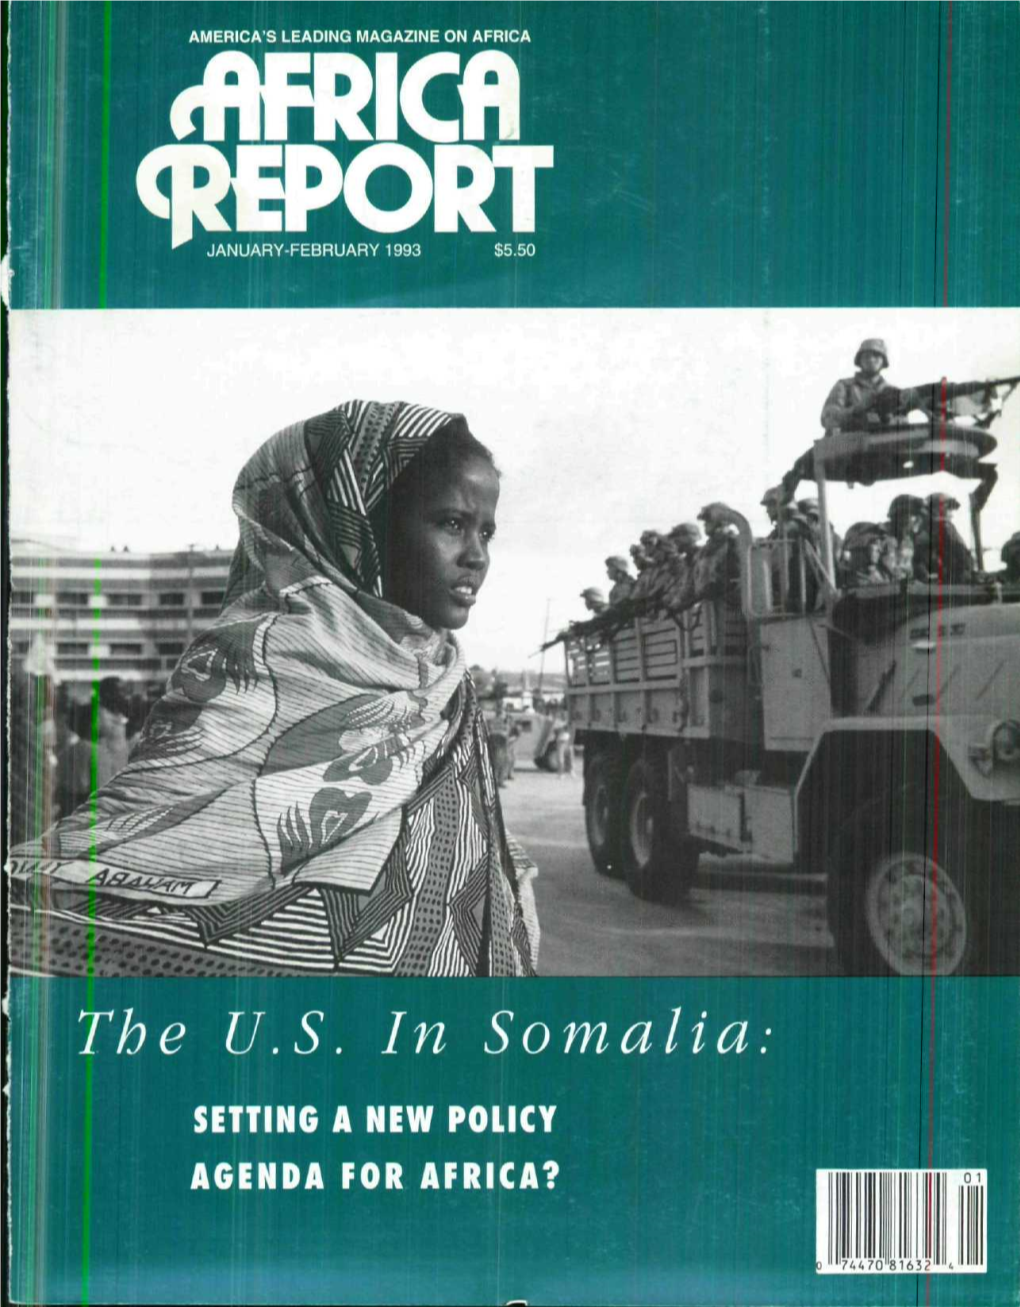 The U.S. in Somalia. SETTING a NEW POLICY AGENDA for AFRICA?